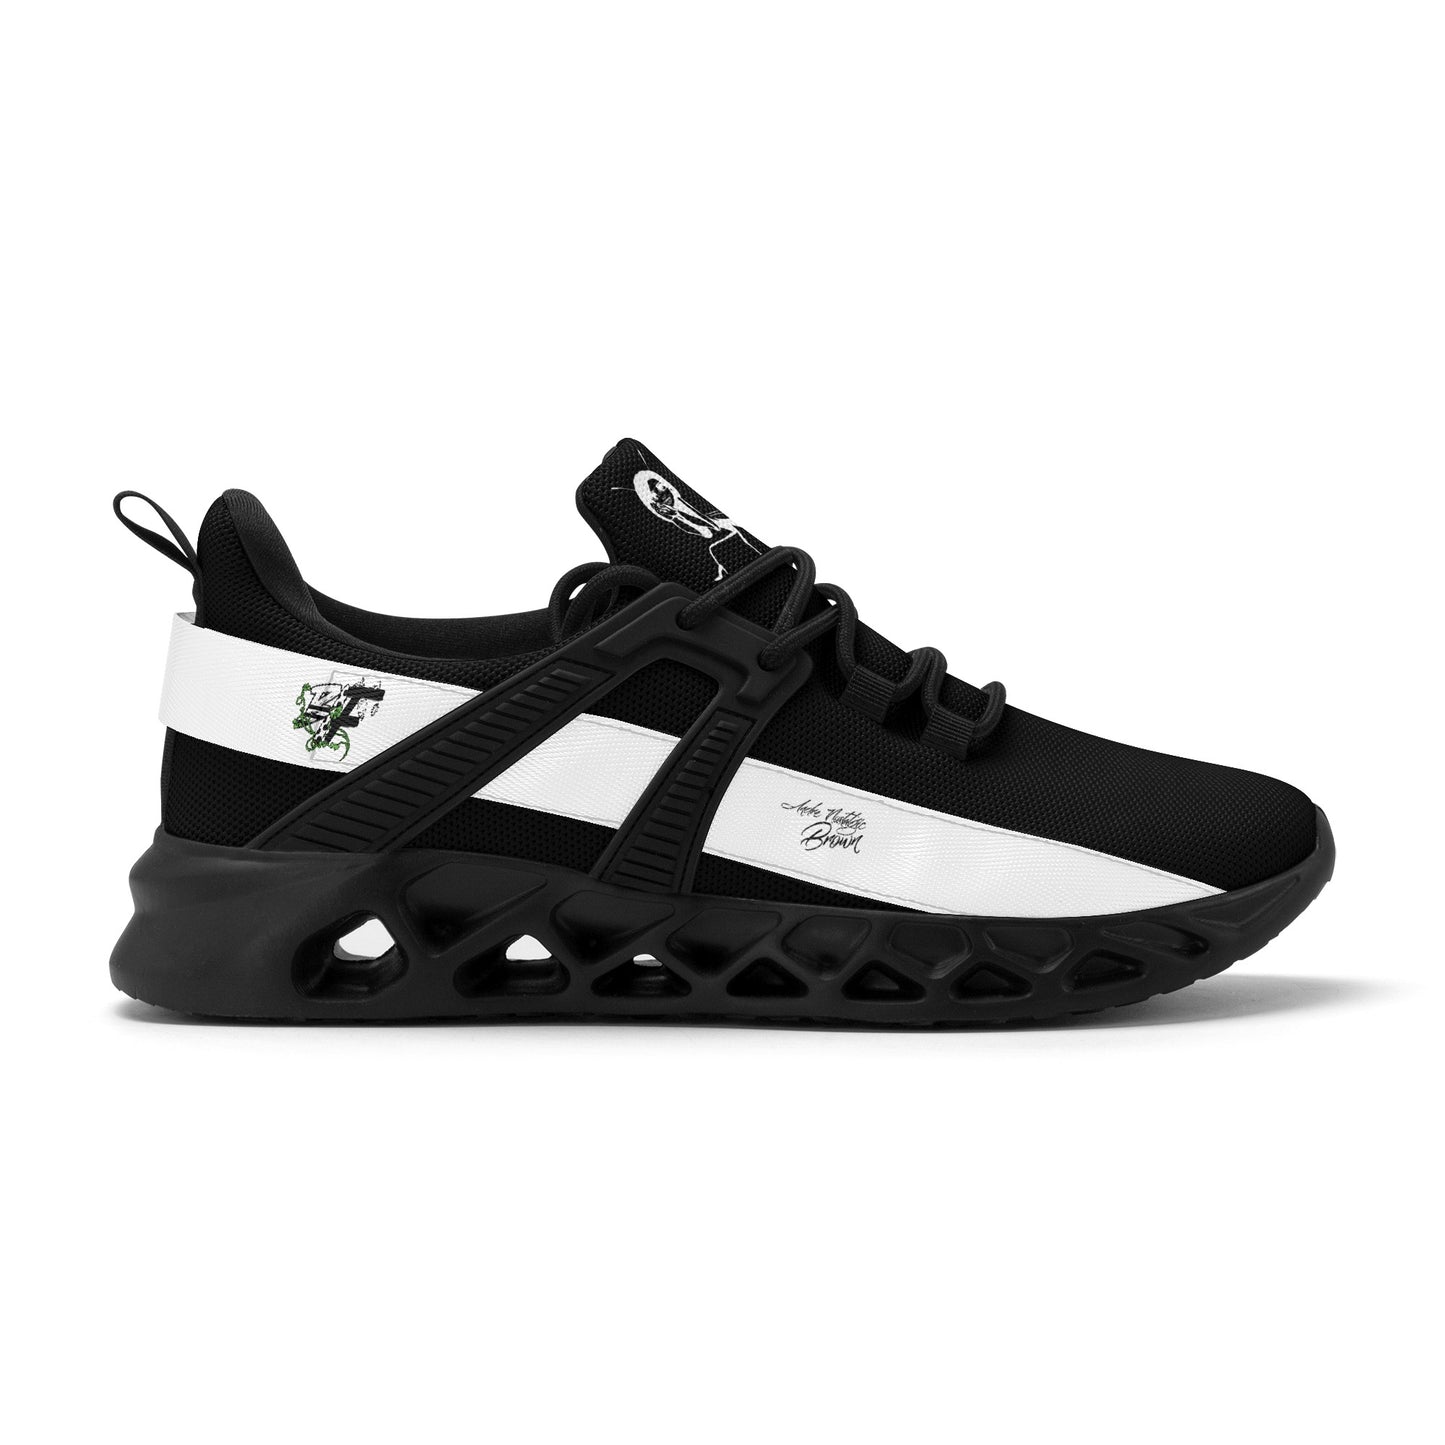 Black Insect Famili Praying Queen Women's New Elastic Sport Sneakers